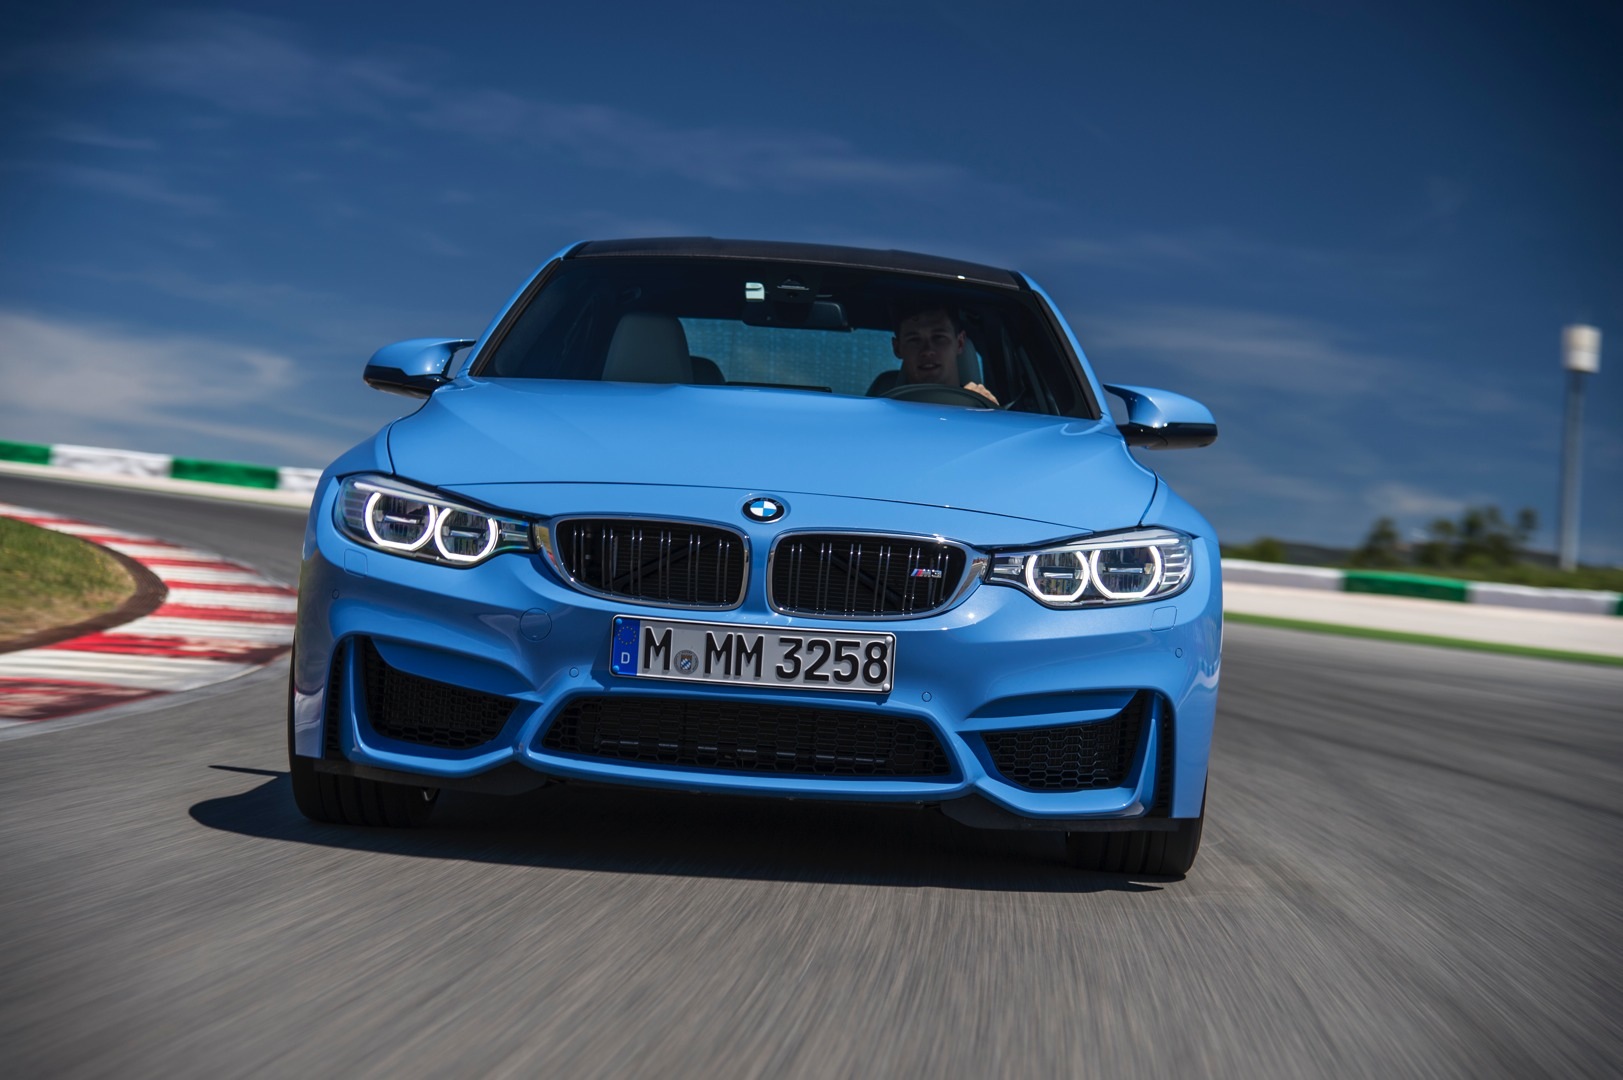 New BMW M3 and M4 HD Wallpapers Are Here - autoevolution